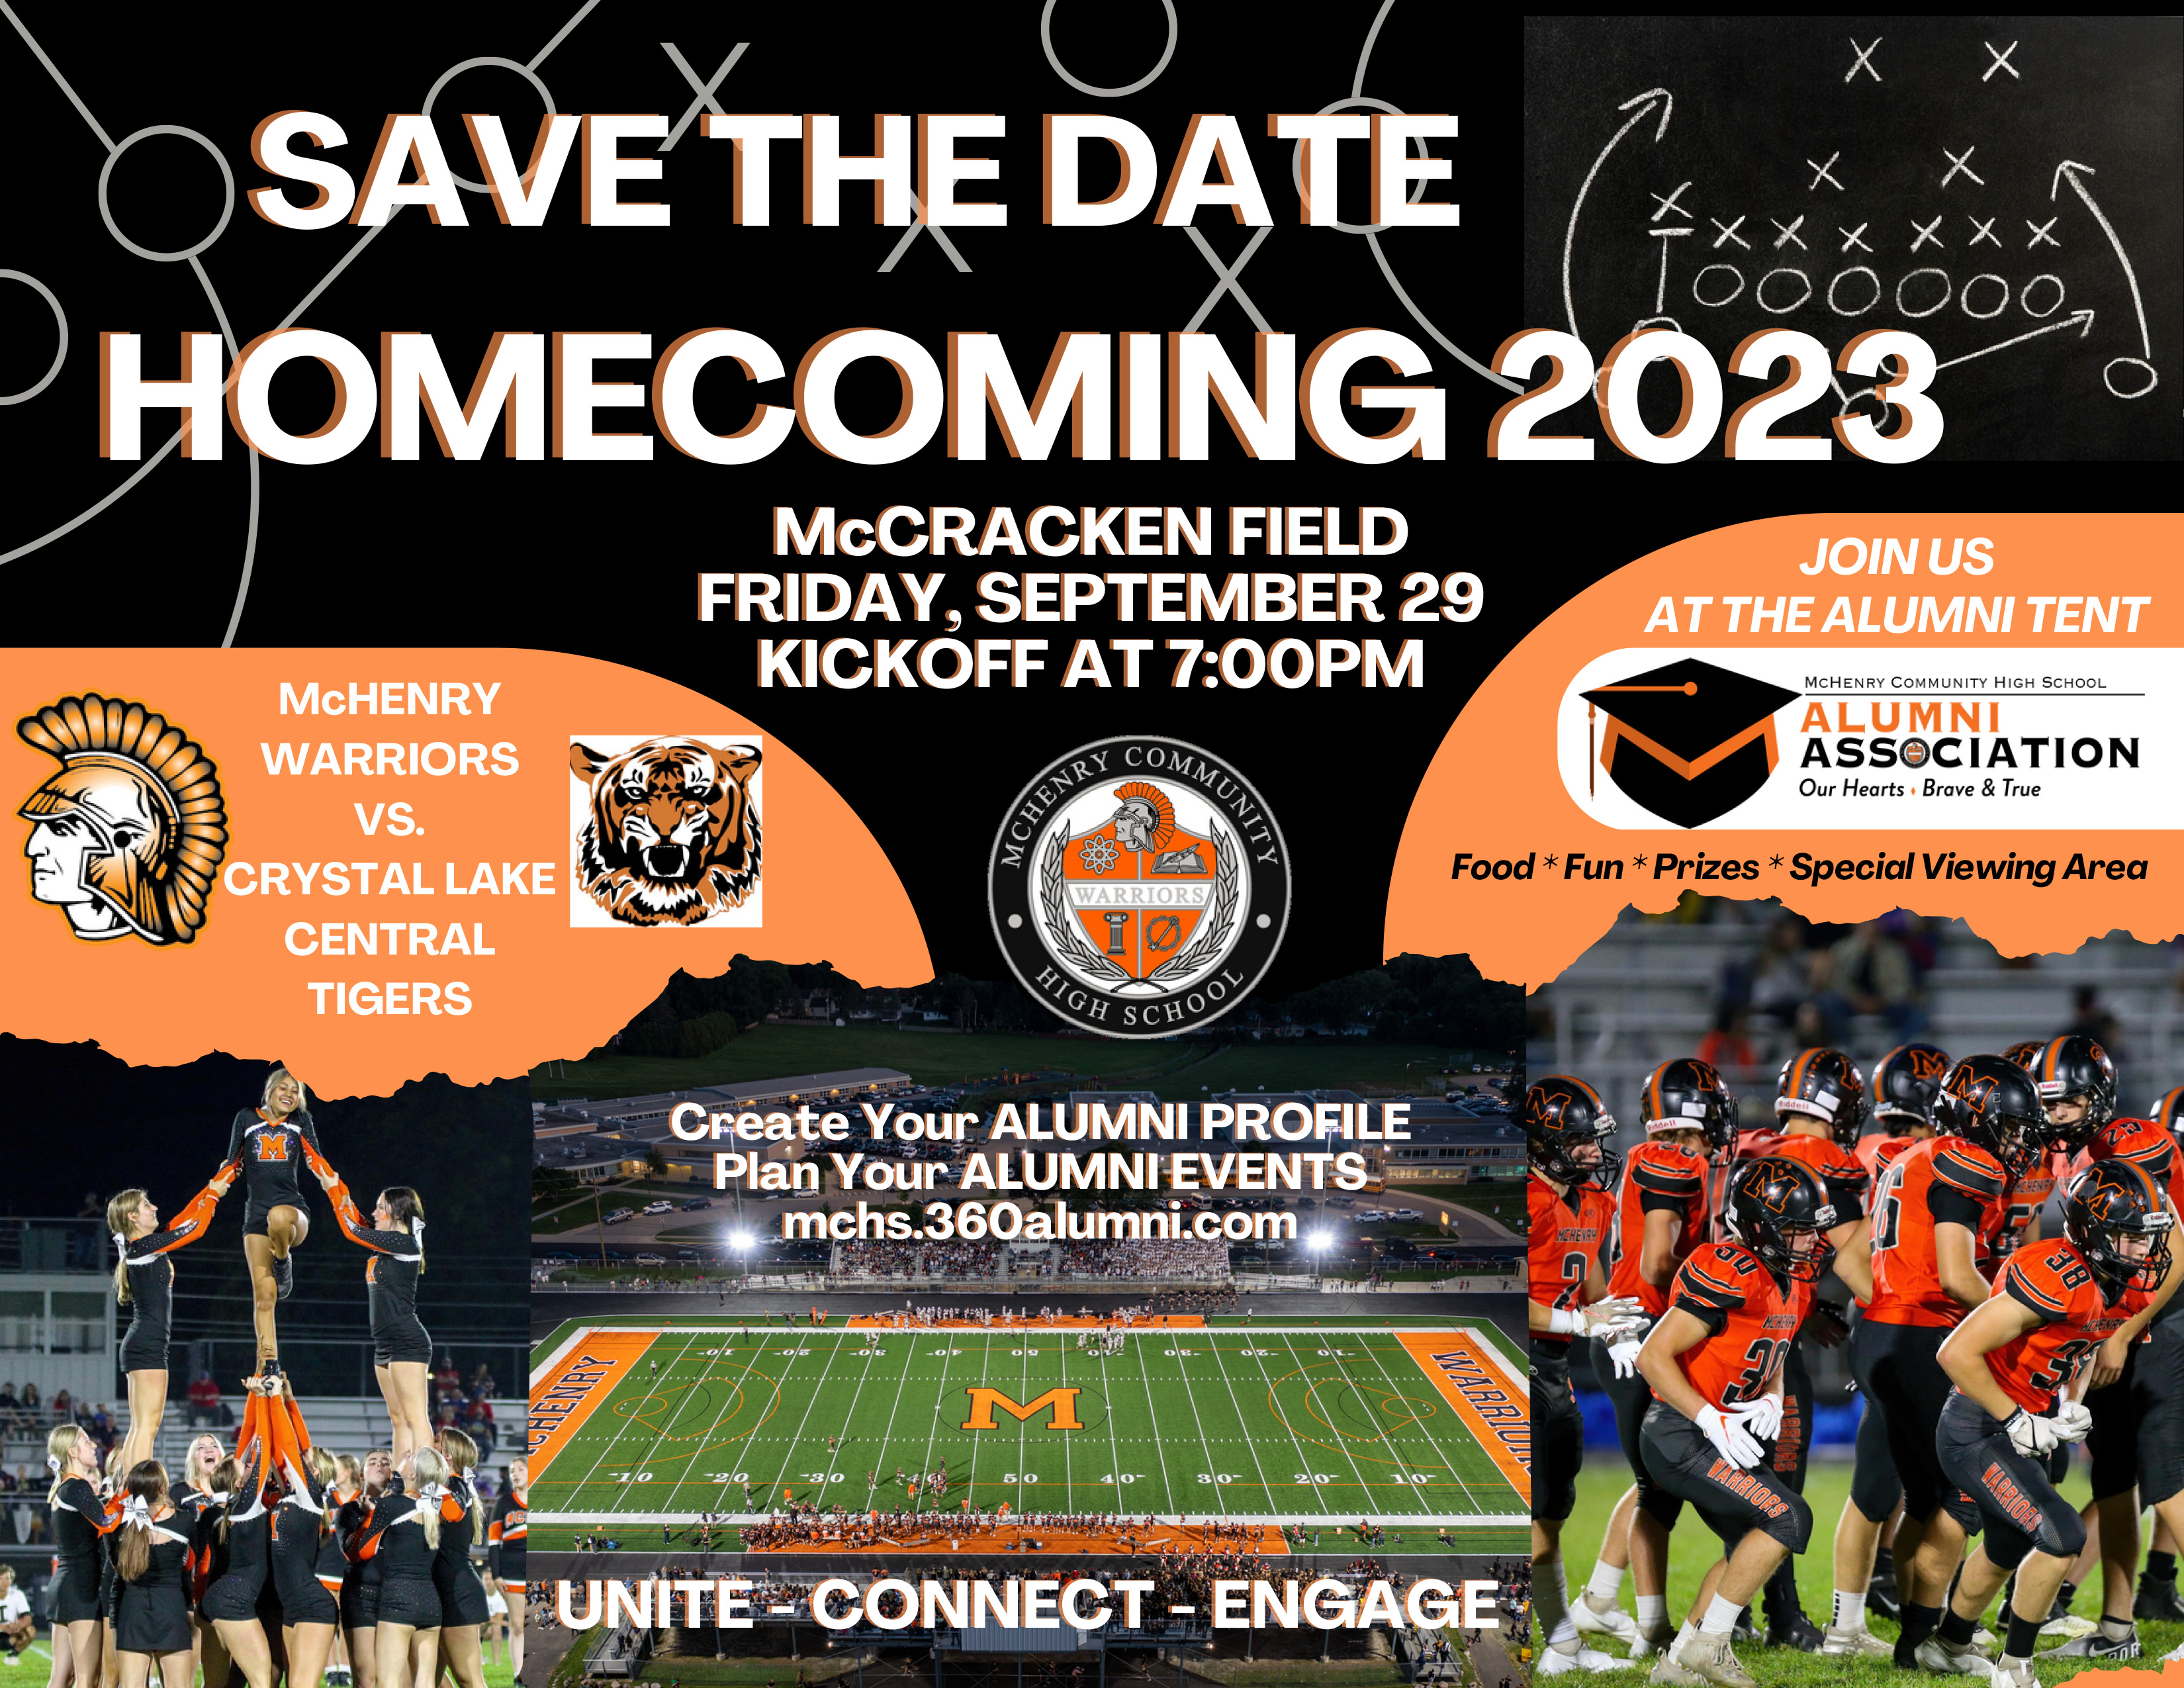 Save the Date Homecoming 2023 McCracken Field Friday September 29. Kickoff at 7:00 p.m. McHenry Warriors vs. Crystal Lake Central Tigers. Join us at the alumni tent. Food Fun Prizes and Special Viewing Area. Create your alumni profile. Plan your alumni events. mchs.360.alumni.com Unite Connect Engage